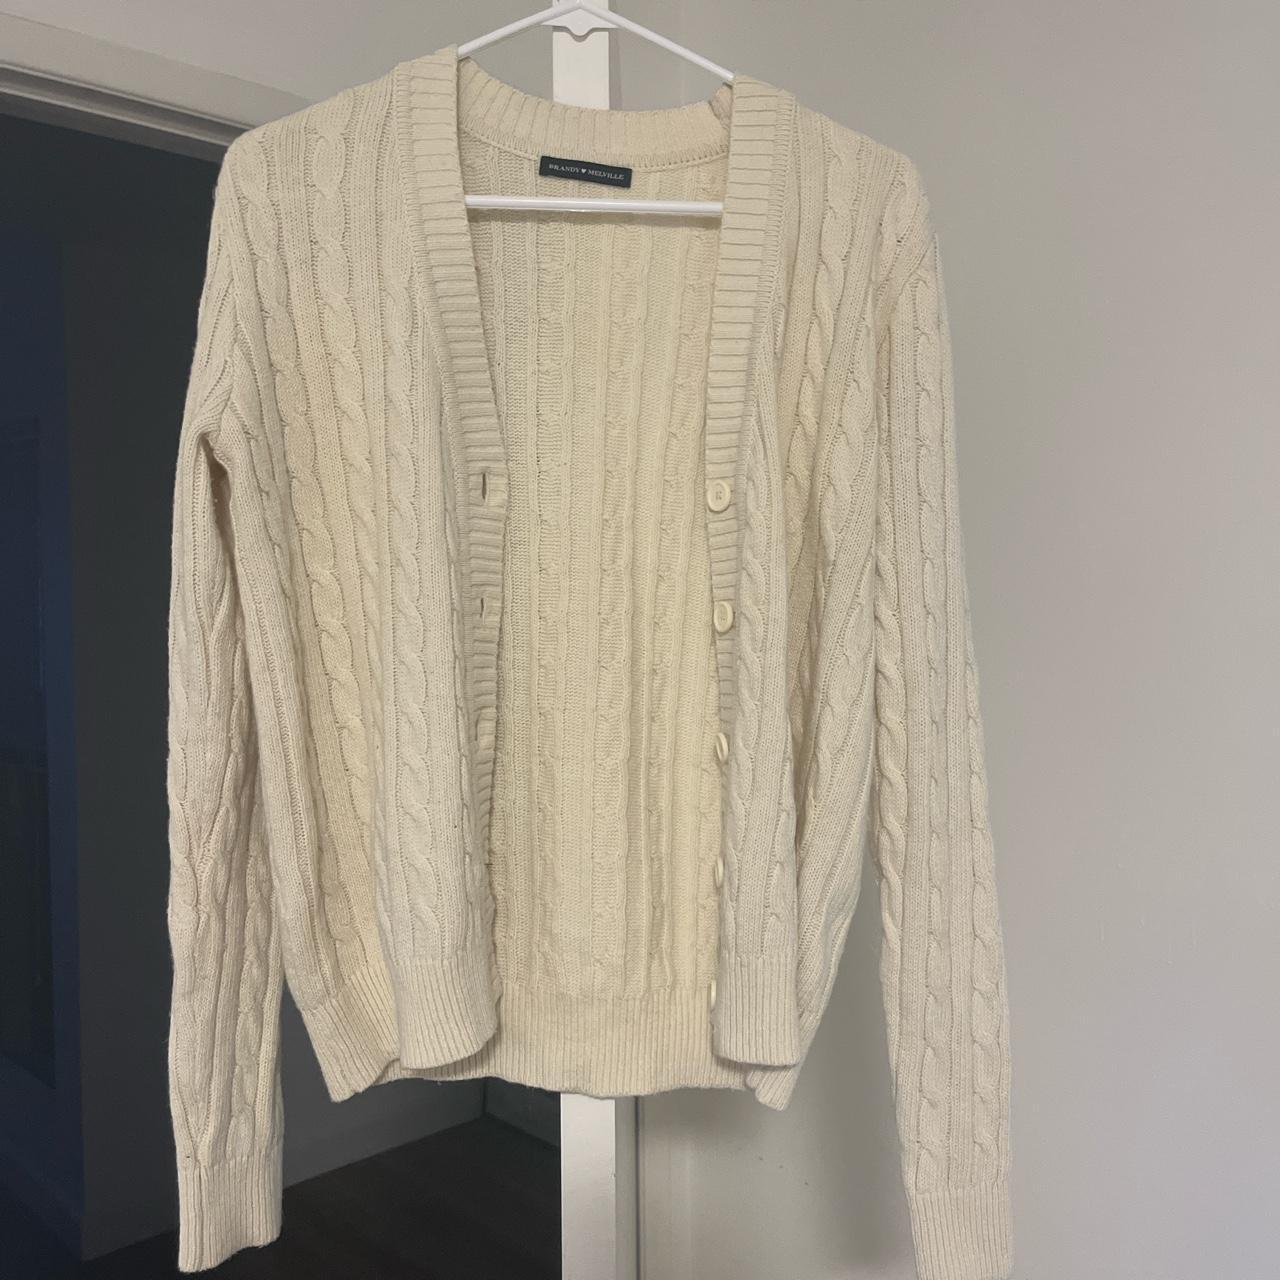 off white knit cardigan - not sold online anymore - Depop